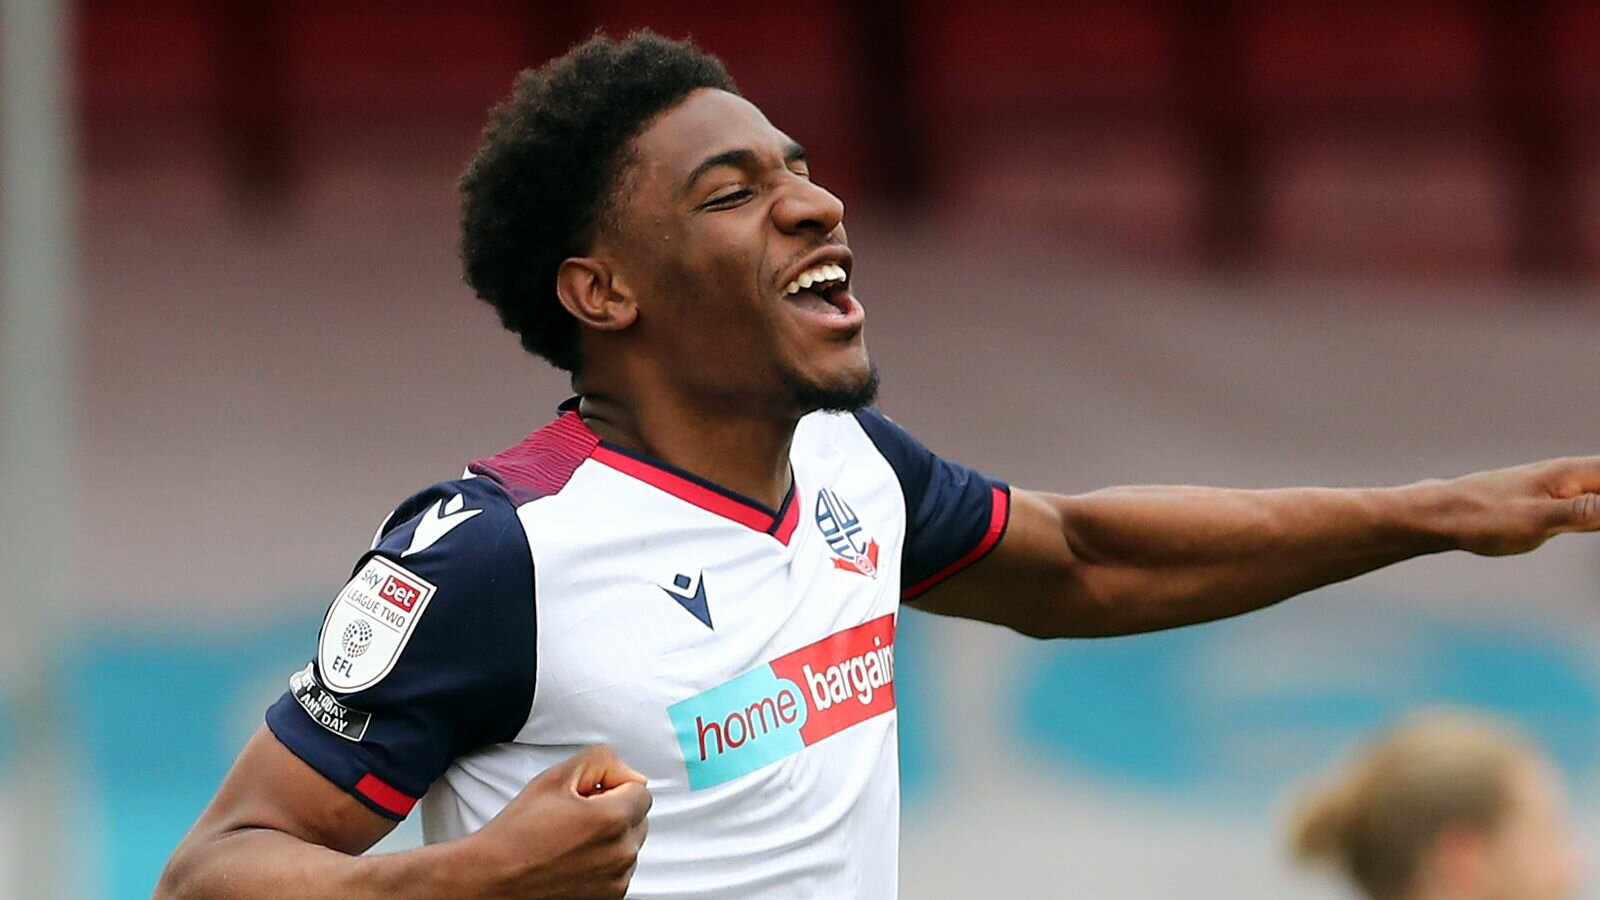 Oladapo Afolayan's Goal Helps Bolton Wanderers Gain Promotion